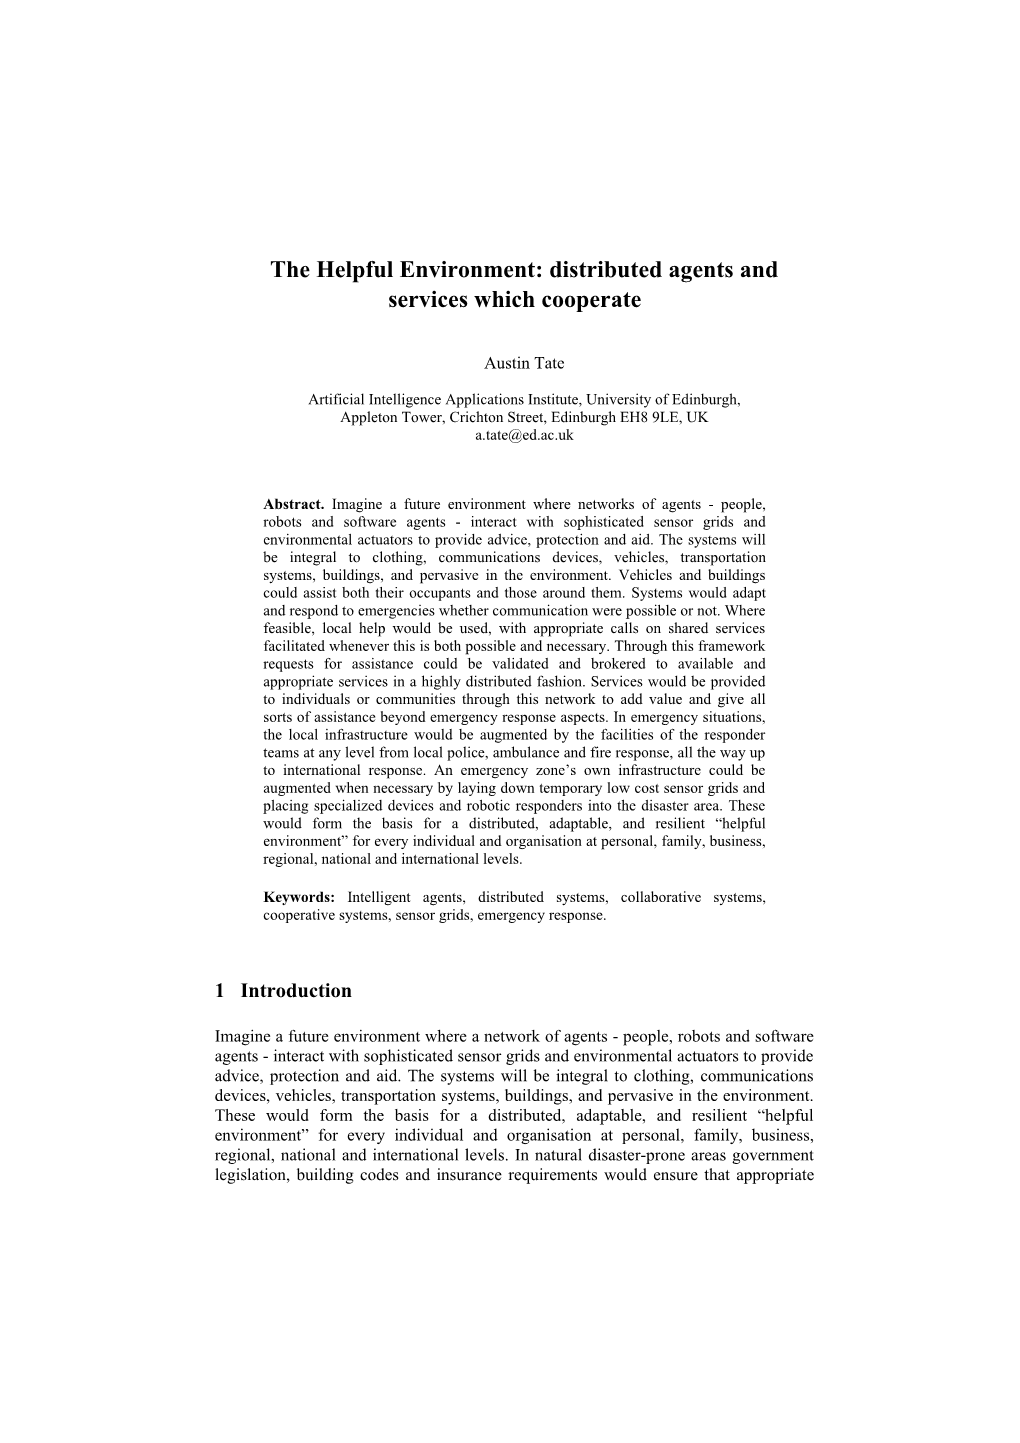 The Helpful Environment: Distributed Agents and Services Which Cooperate